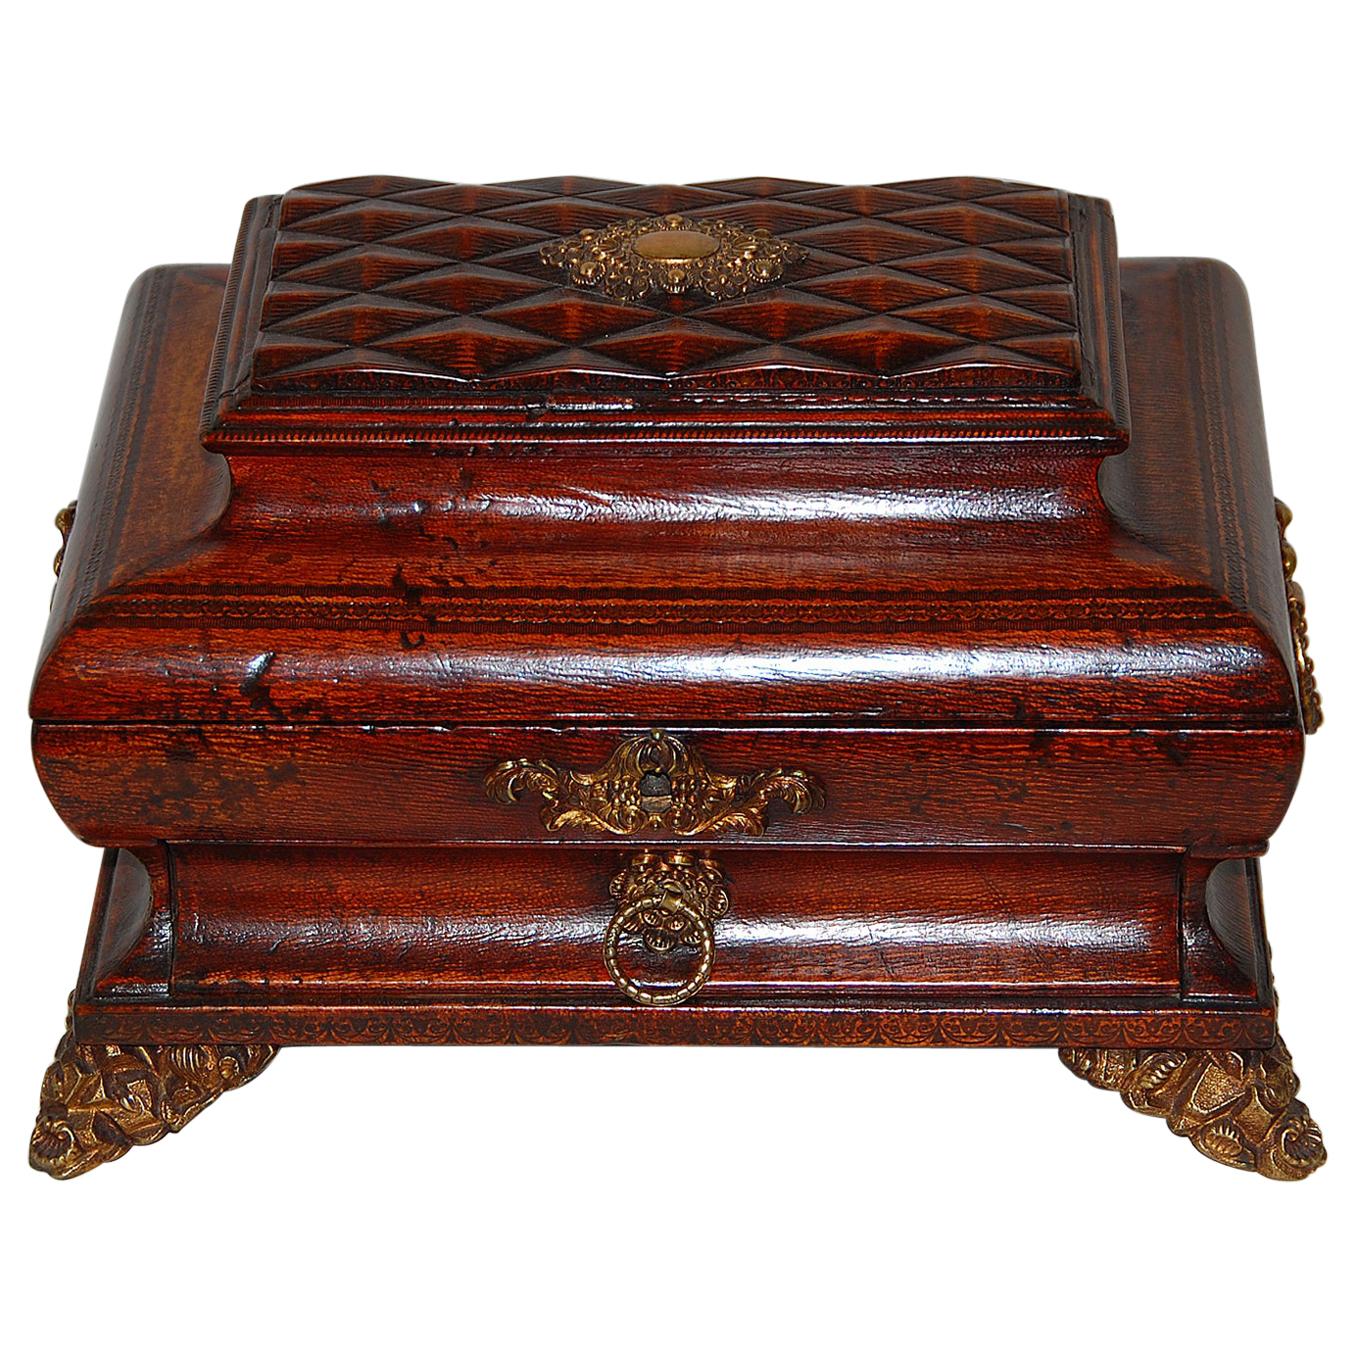 English Regency Period Embossed Leather Sewing Box with Drawer and Brass Mounts